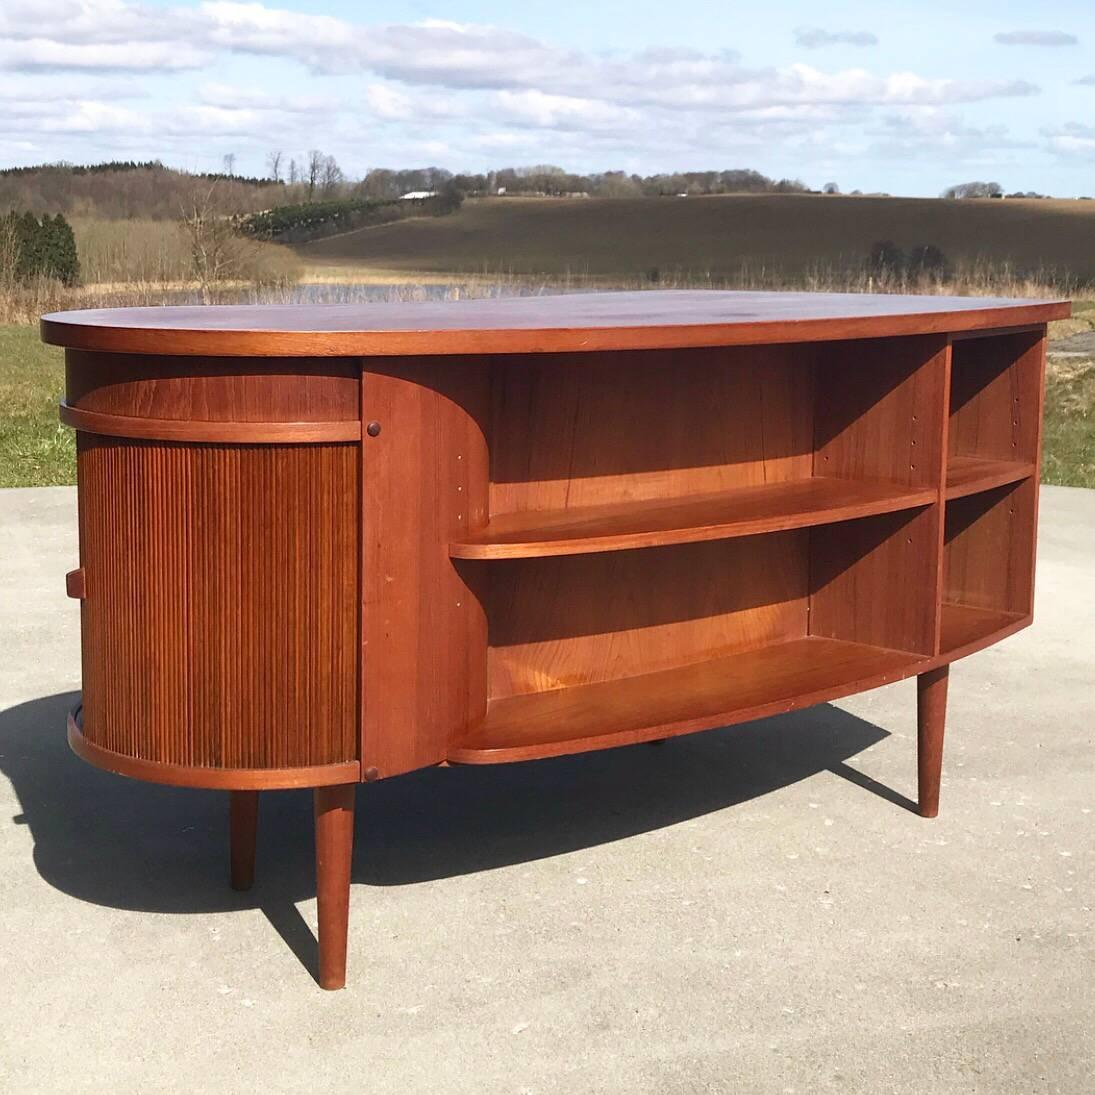 Teak office desk model 54 designed by Kai Kristiansen for Feldballe Møbelfabrik back in the 1960s. 

the iconic and rare teak desk is designed to stand open in the room as there should be acces to both front and back  of the desk.

Four book shelves